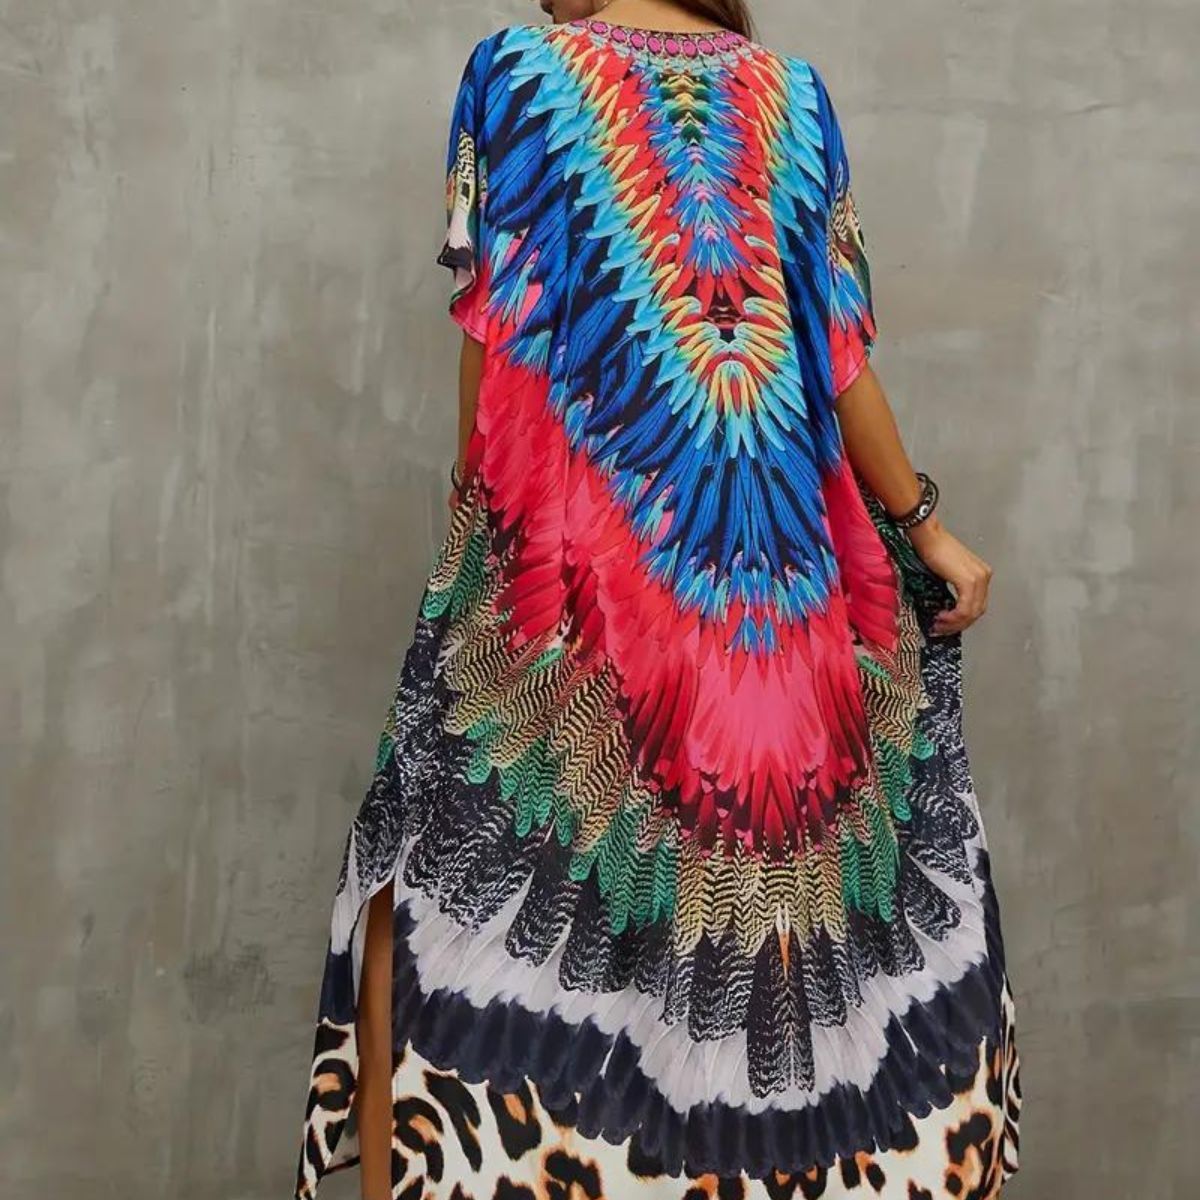 Feather Boho Cover Up Dress